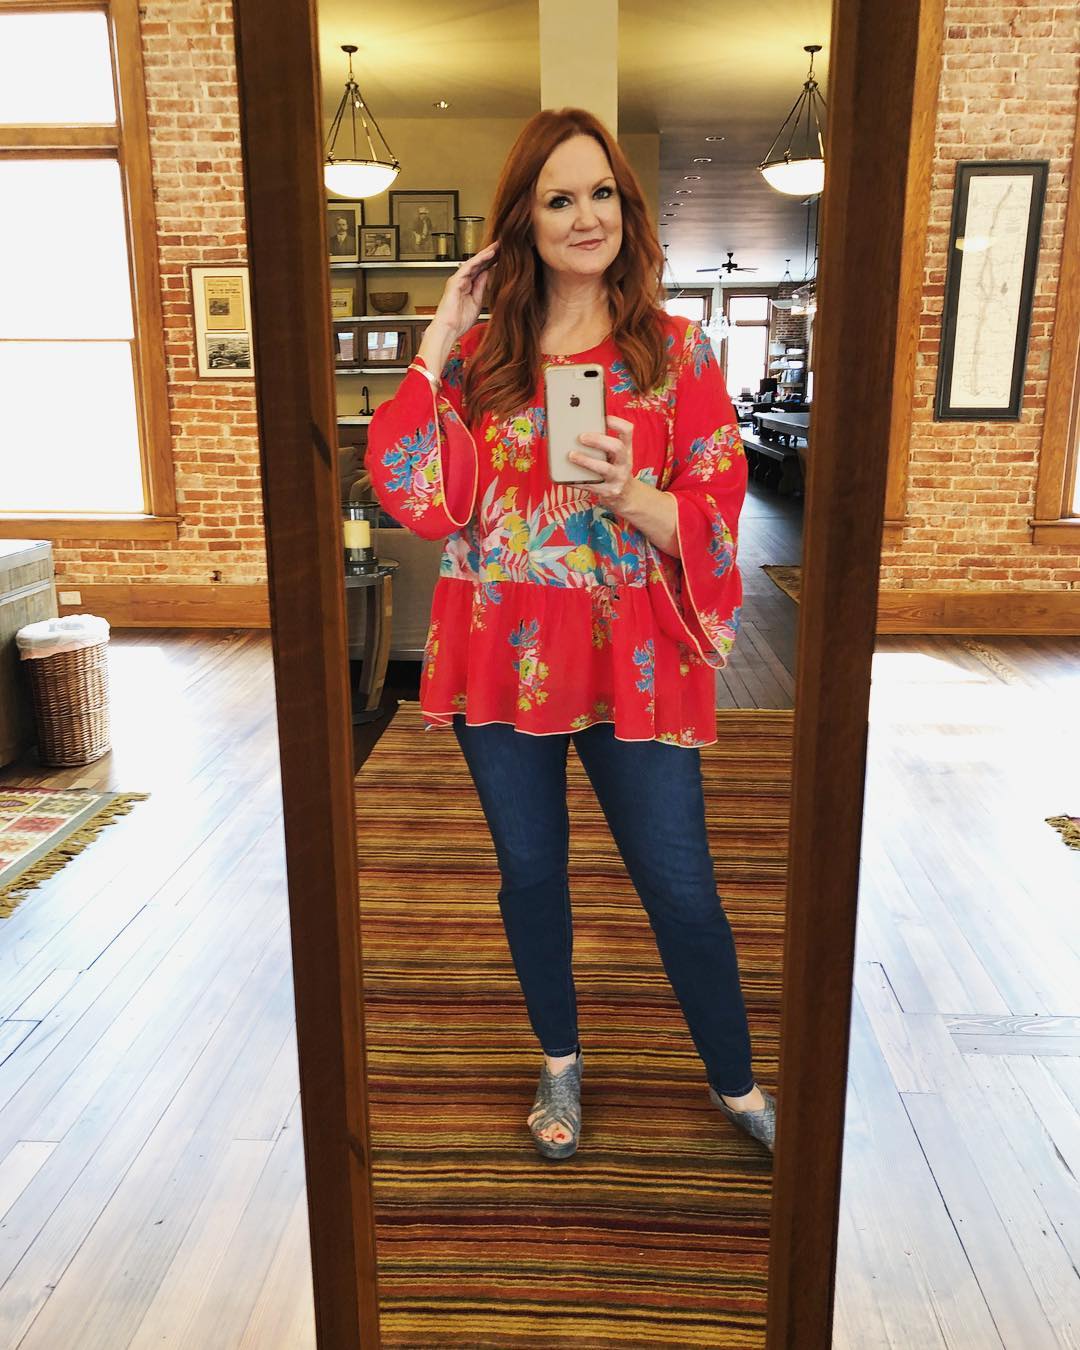 Ree Drummond's Net Worth: How Much Does the 'Pioneer Woman' Make?